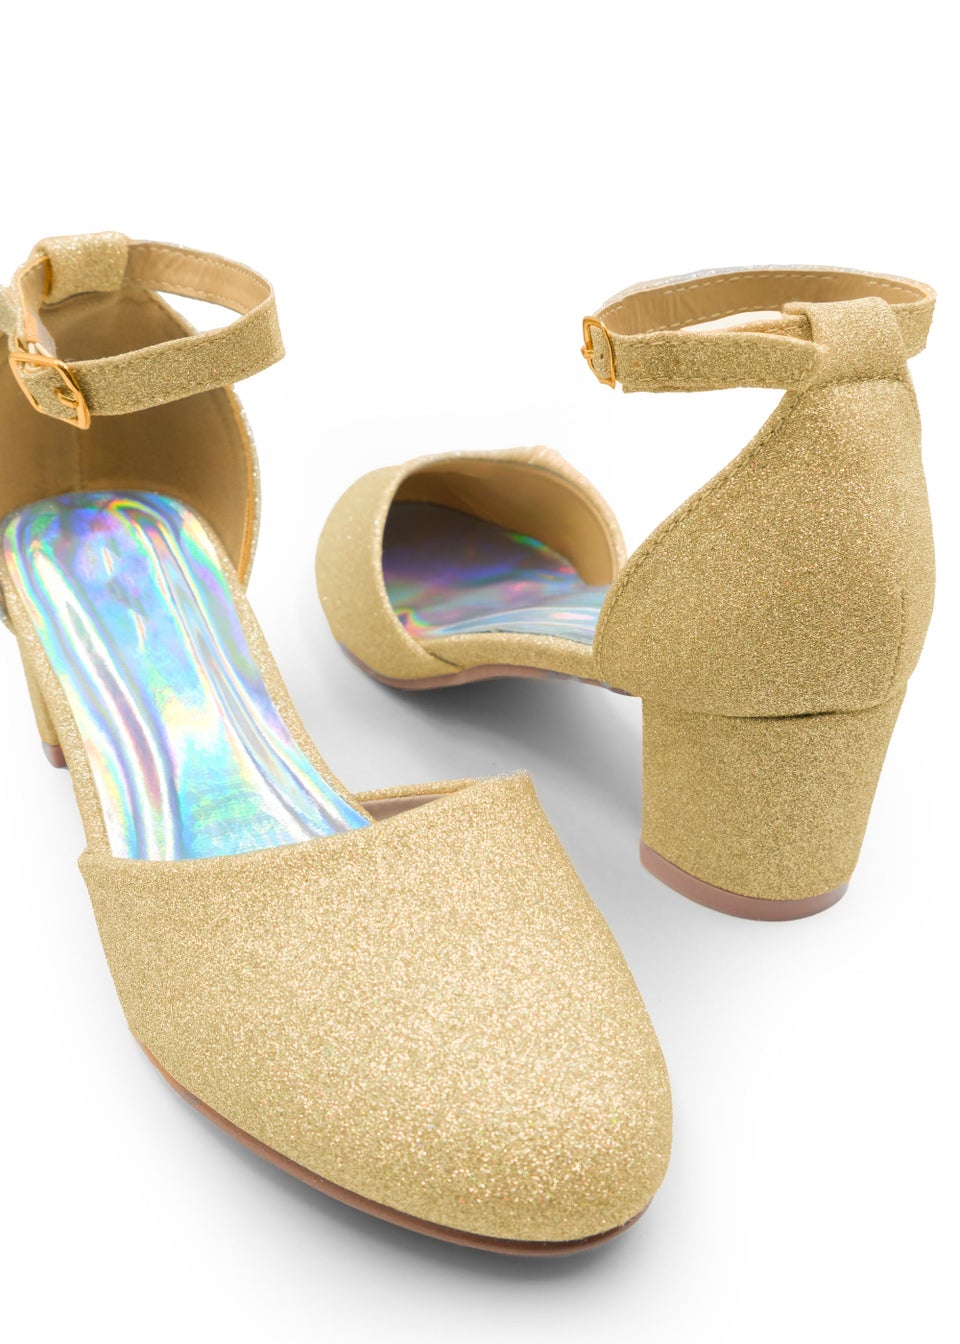 Where's That From Gold Glitter Abena Kids Mid Heel Sandals